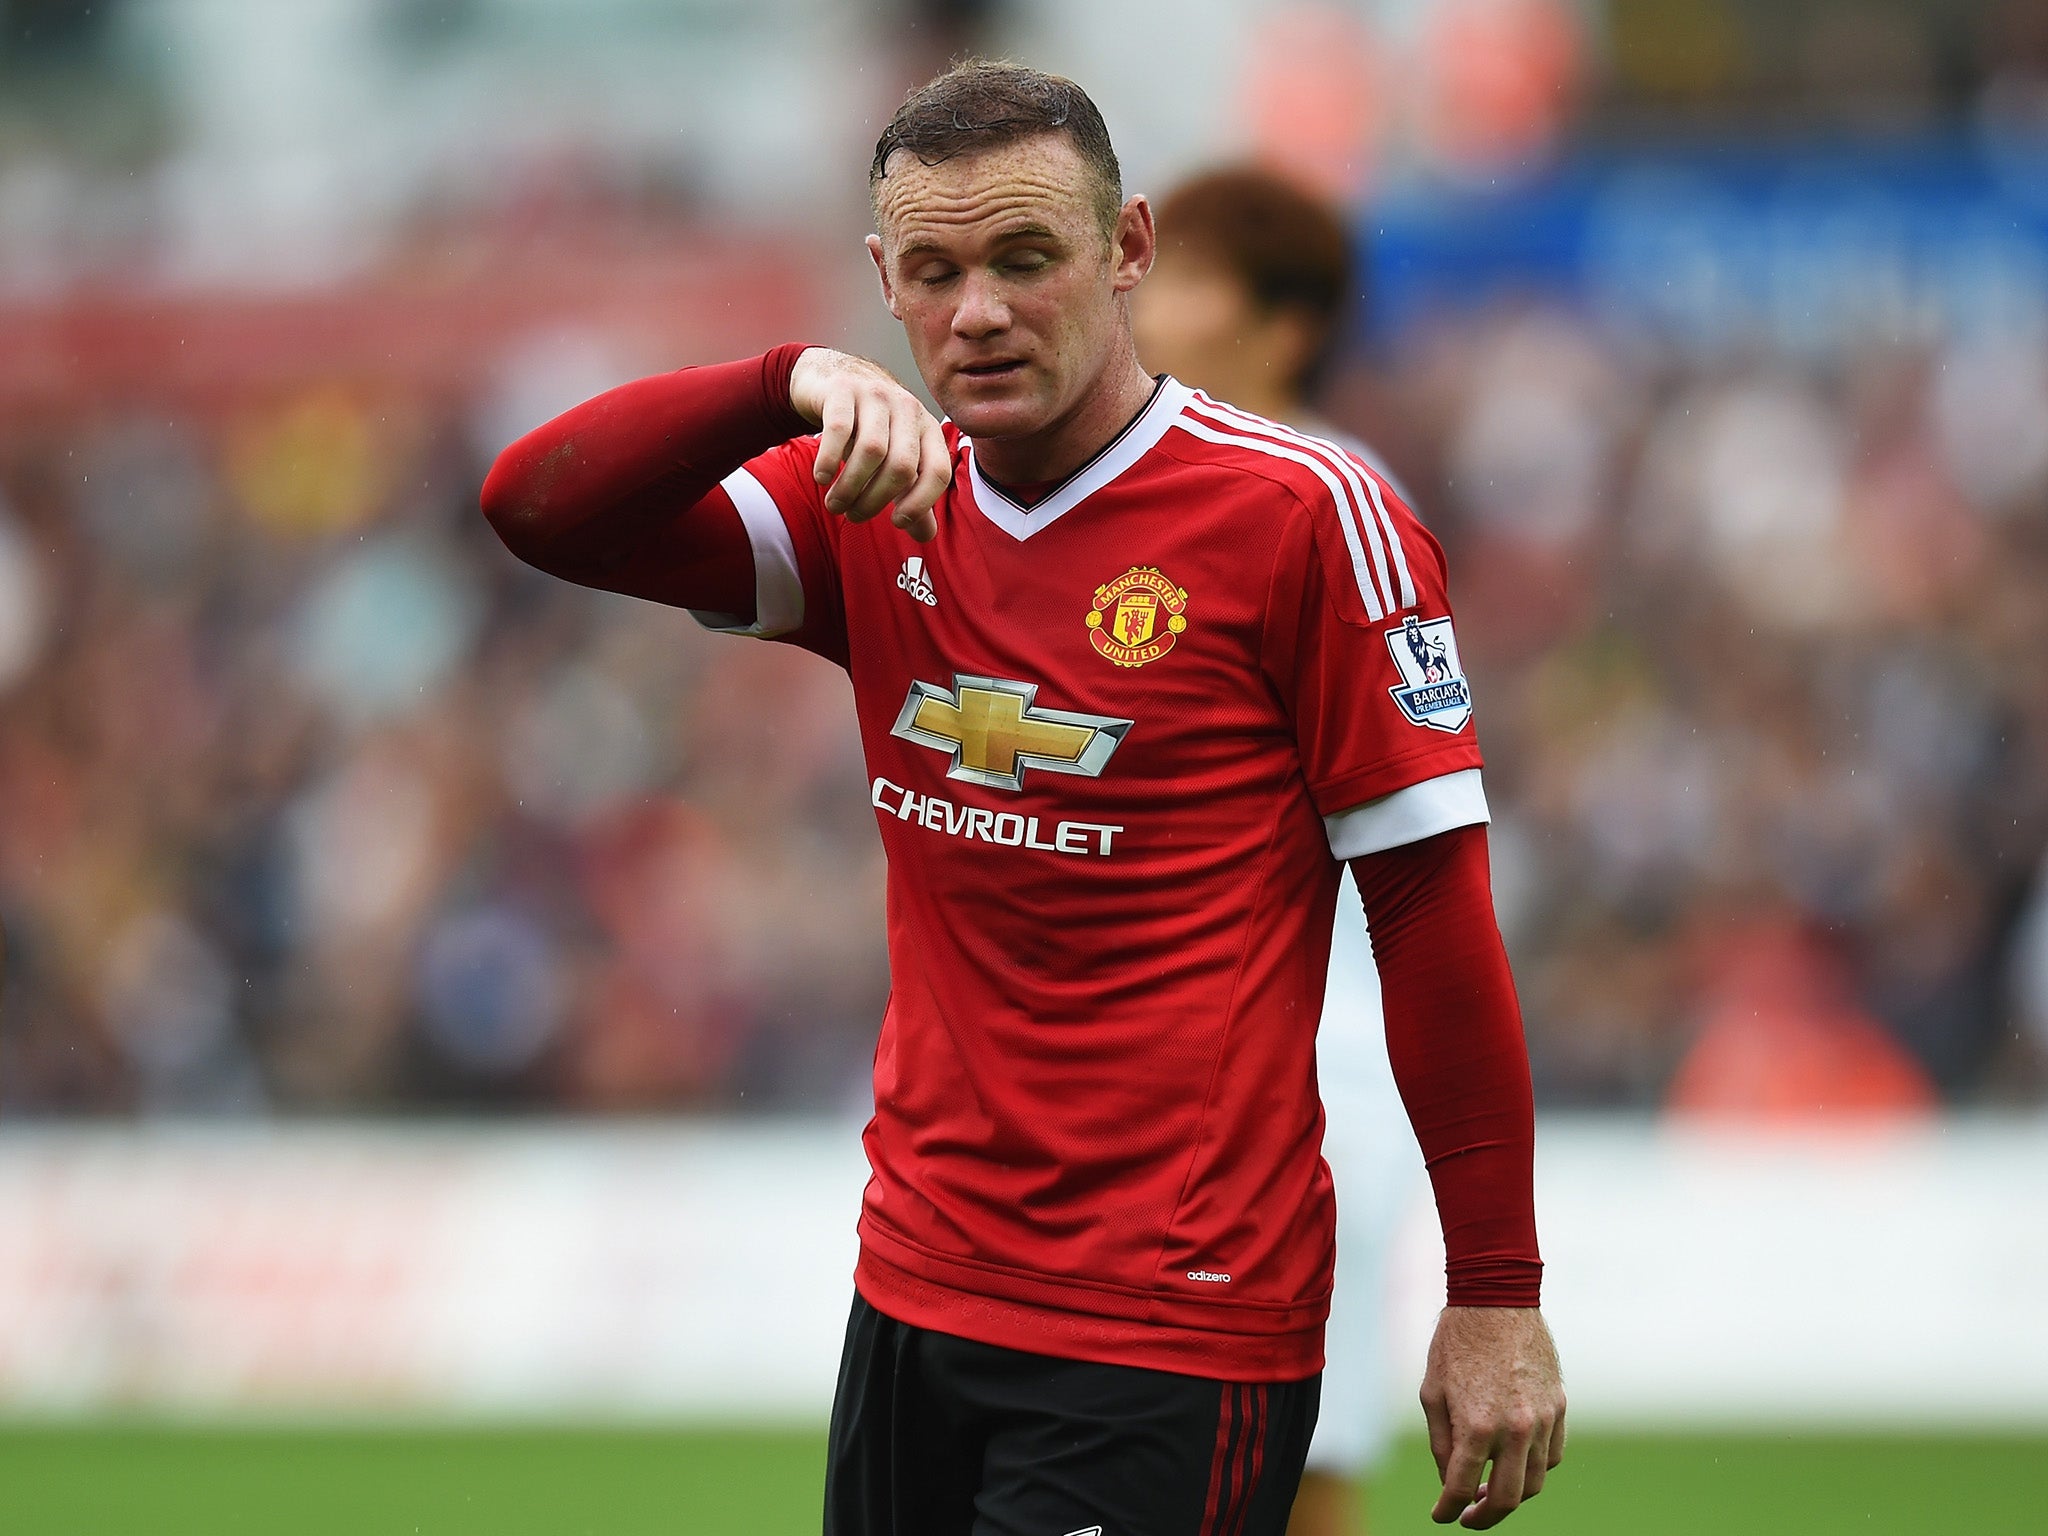 Wayne Rooney looks likely to miss his side's clash against Liverpool